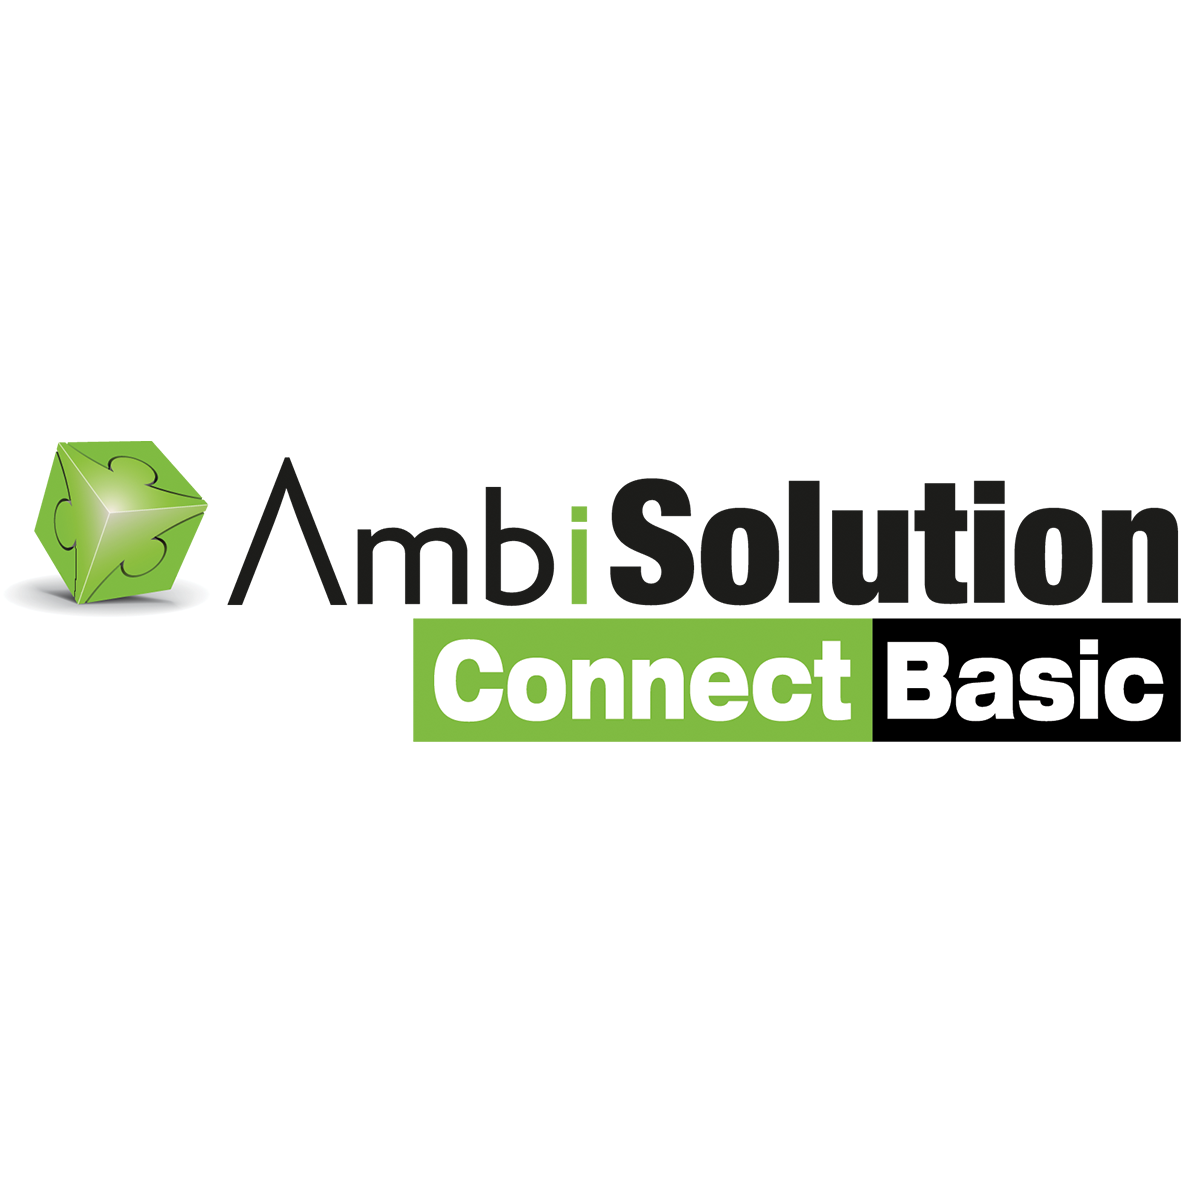 AmbiSolution Connect